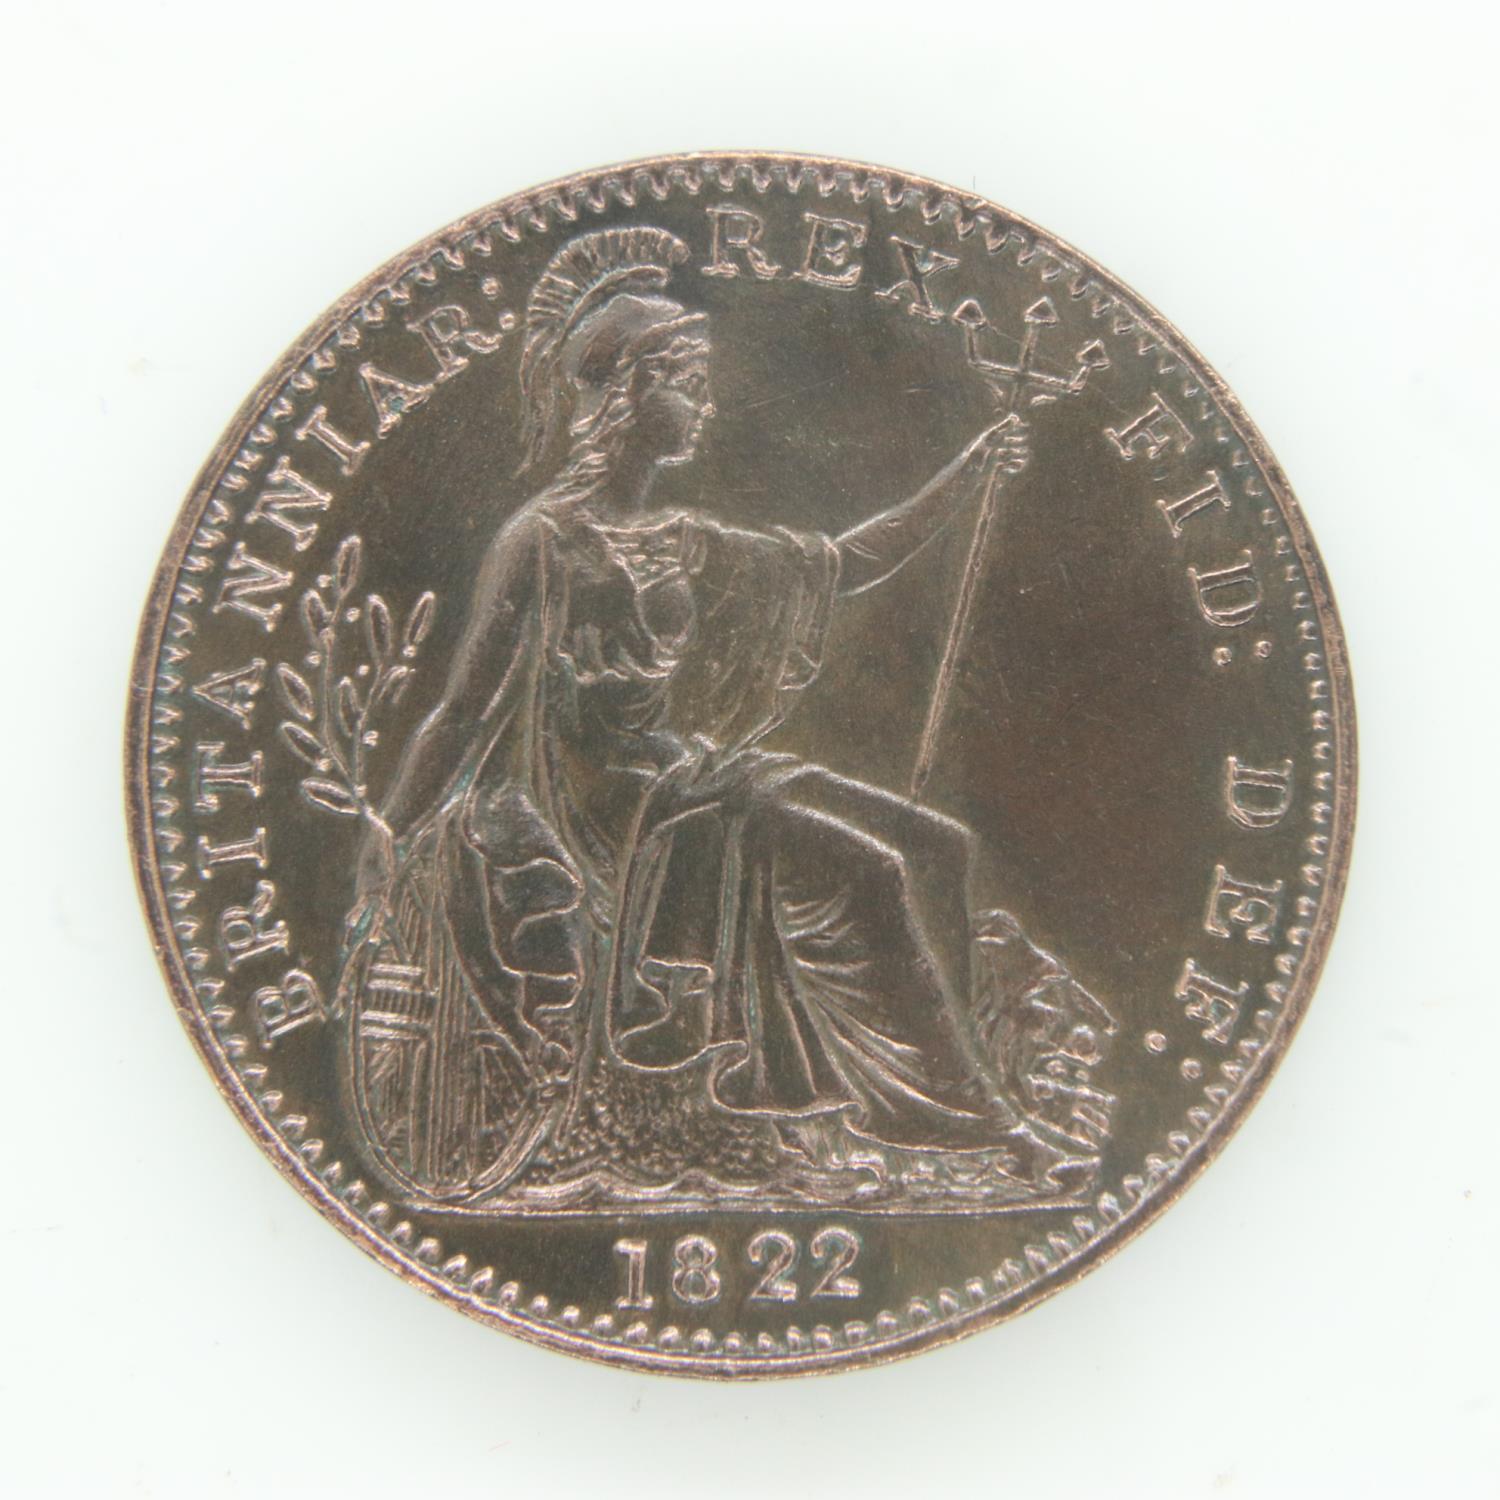 1822 farthing of George IV - EF grade. UK P&P Group 0 (£6+VAT for the first lot and £1+VAT for